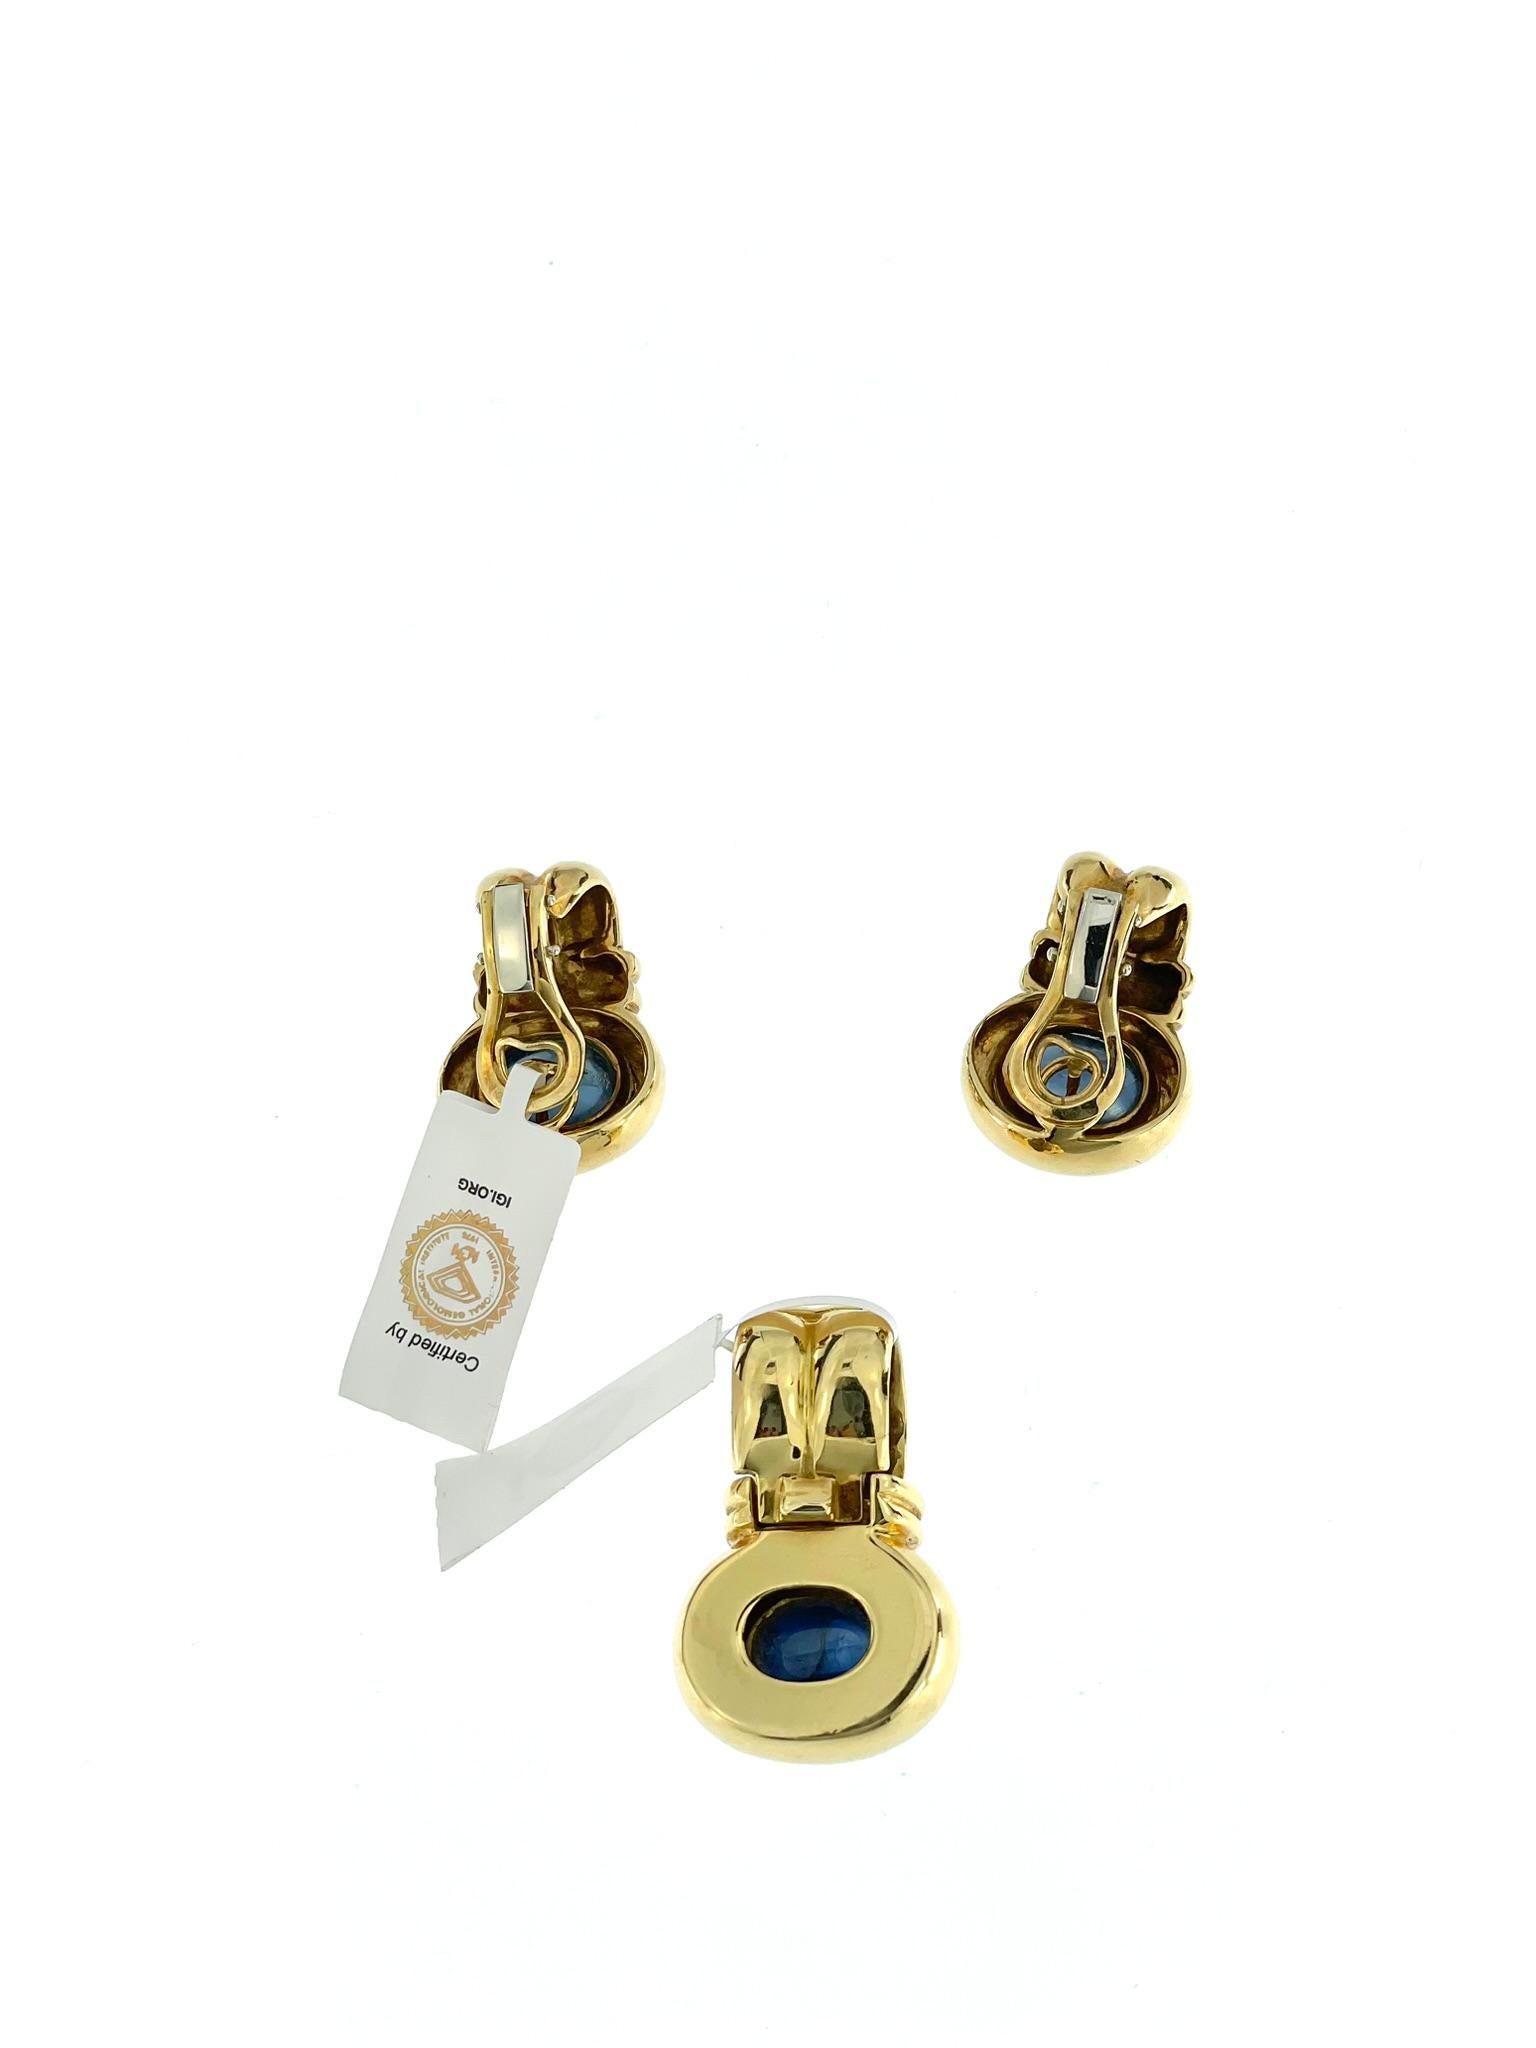 Cabochon IGI Certified Ceylon Sapphires Yellow Gold Set Earrings and Pendant For Sale